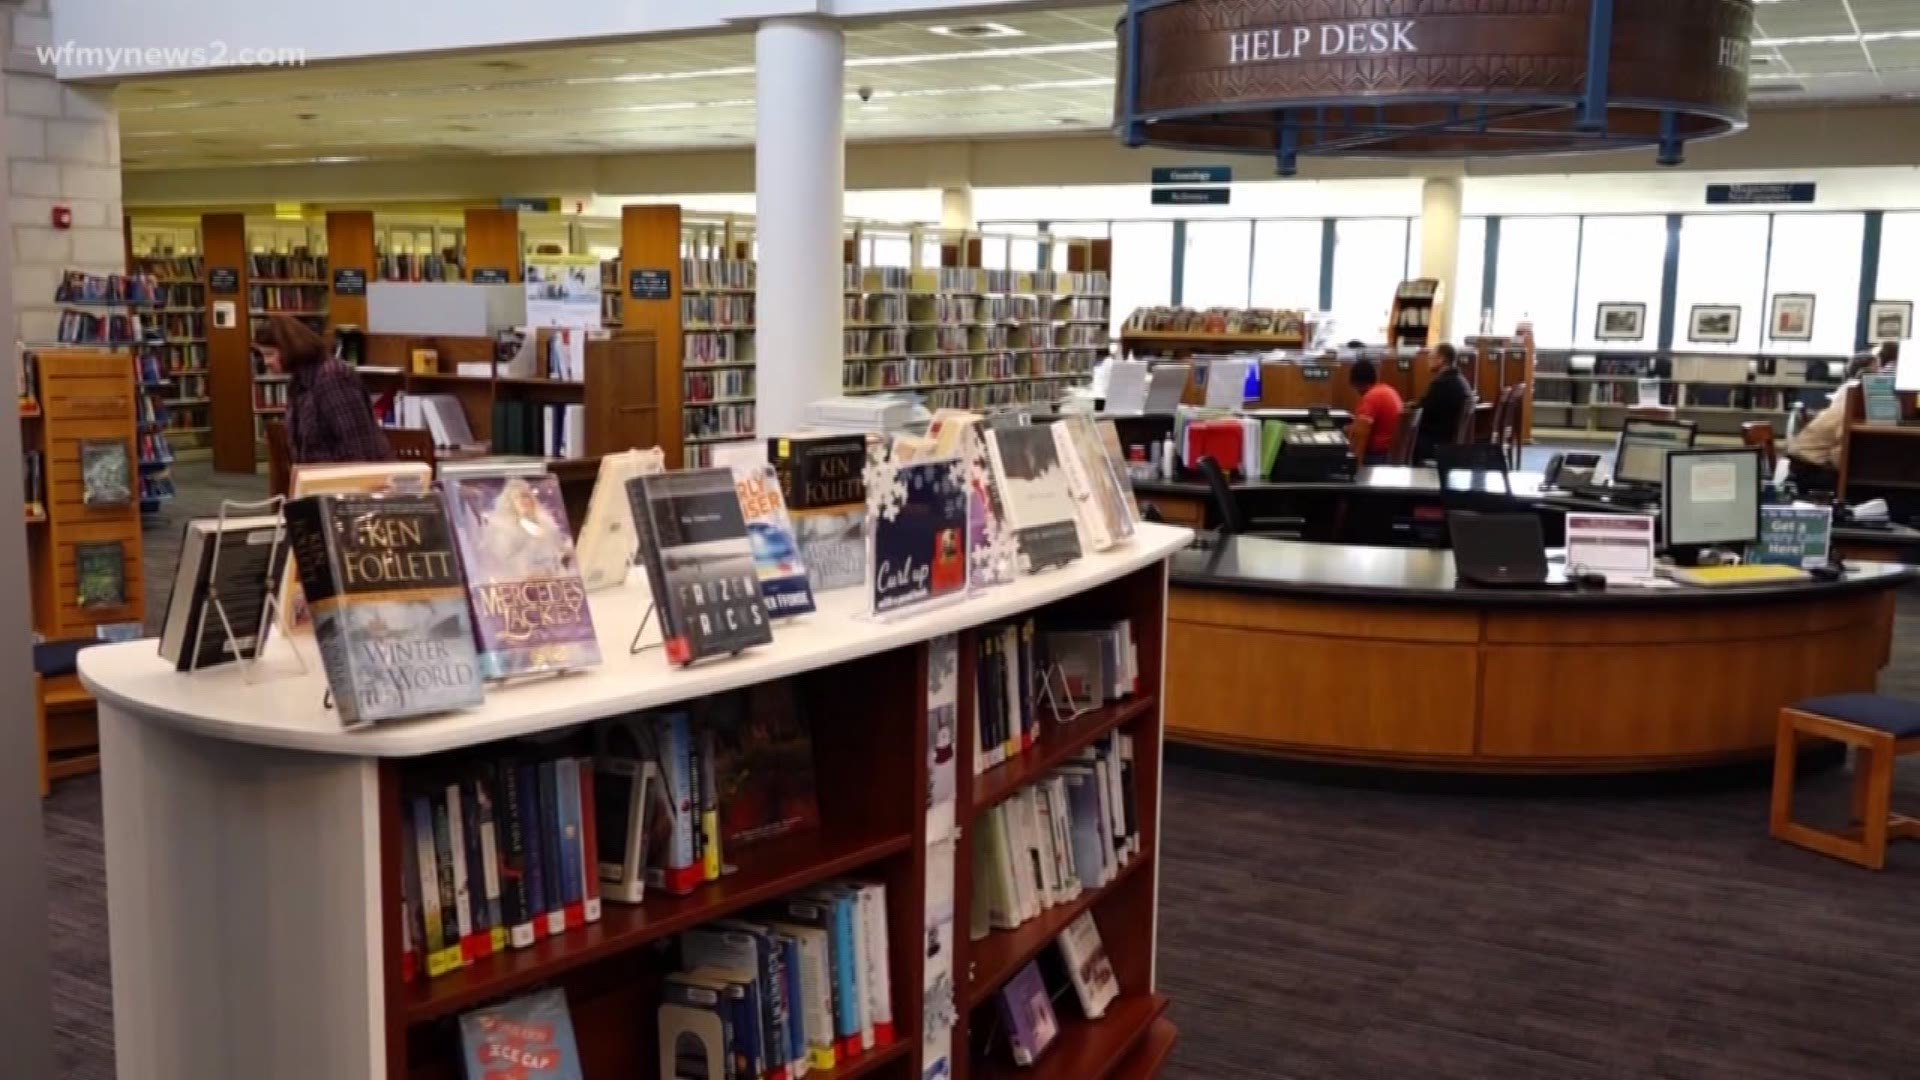 Several library systems across the country have decided to waive late fees altogether.